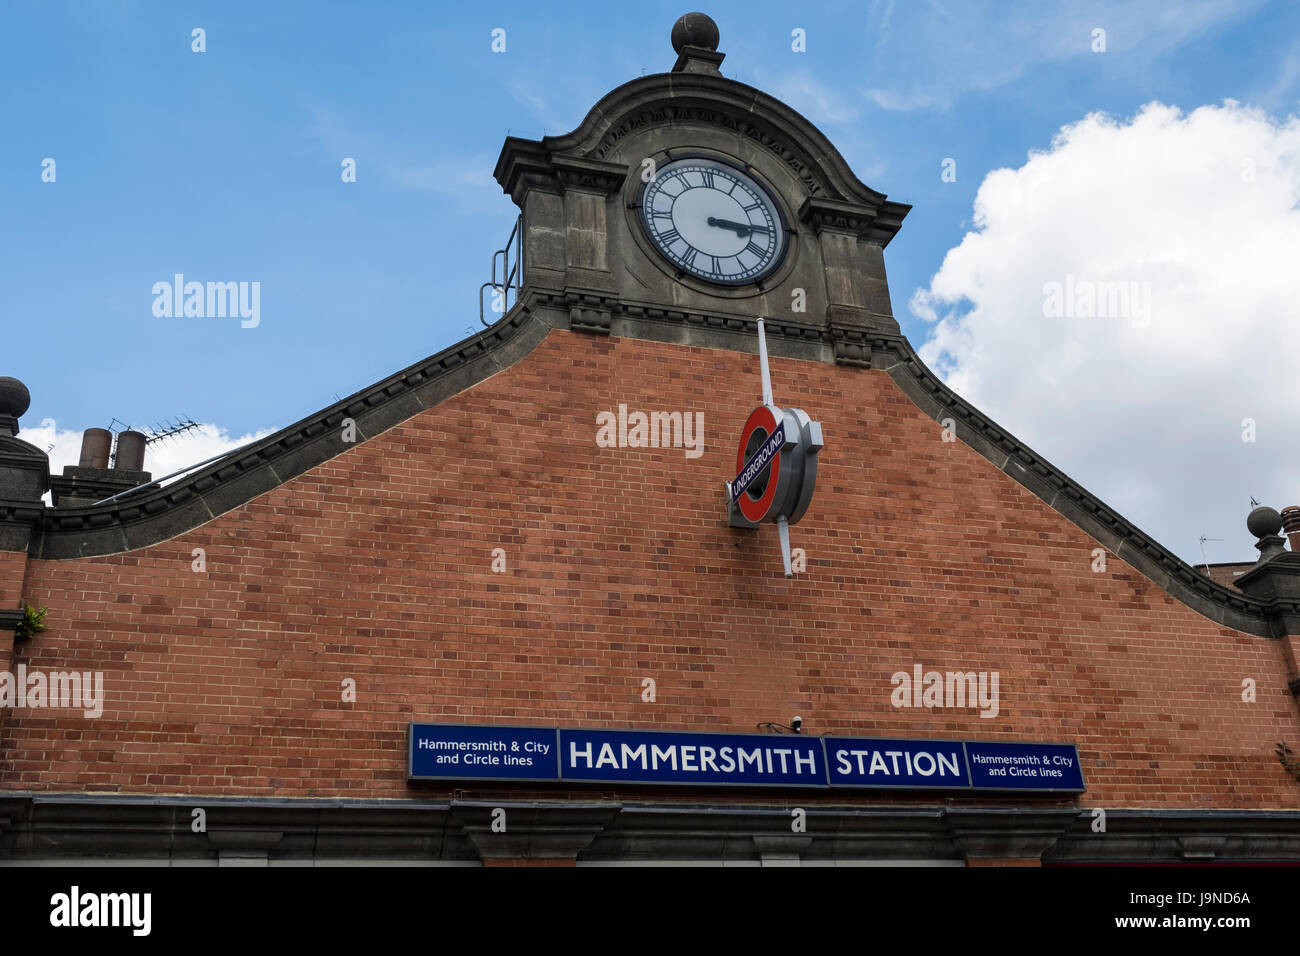 Hammersmith Banque D'Images